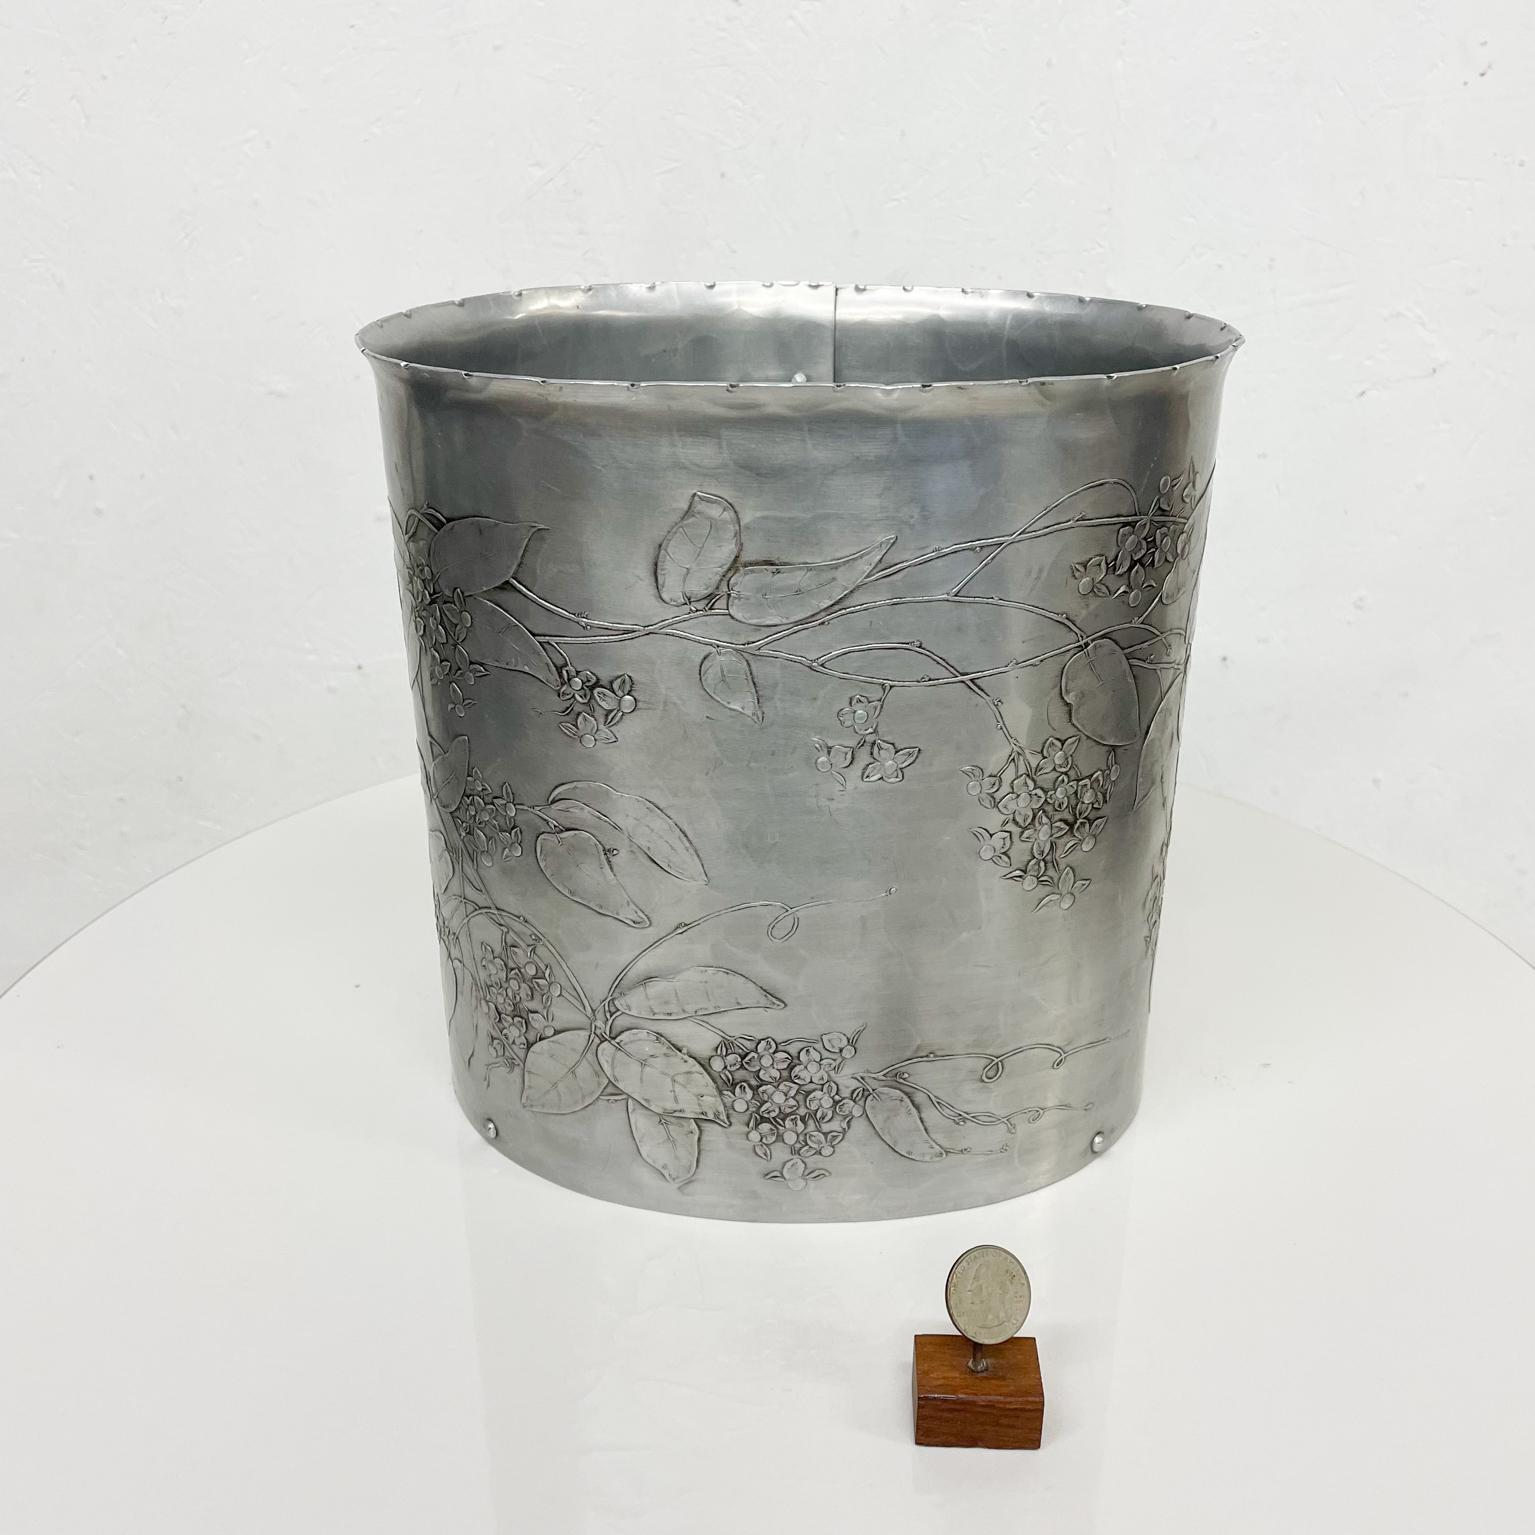 Waste Basket
By Wendell August Forge hand forged Hammered Aluminum Waste Basket Pretty floral in Oval Shape 1960s
Riveted Iron Art
Measures: 10 W x 7.25 D x 10 H inches
Retains original paper label and stamp from the maker. Grove City, PA
Light